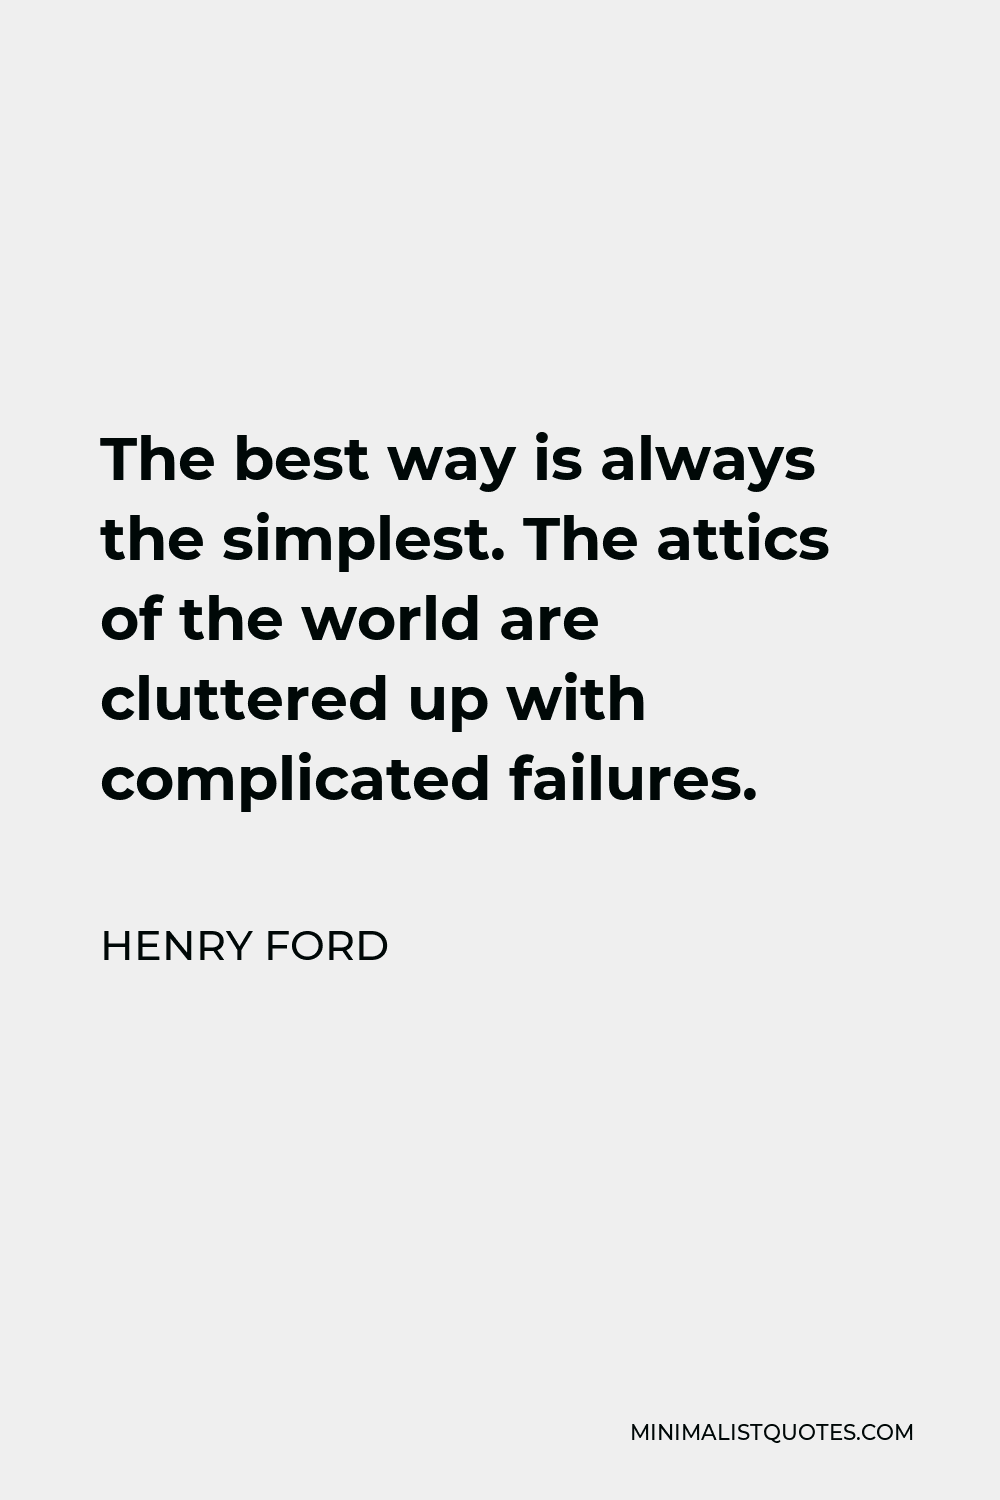 Henry Ford Quote - The best way is always the simplest. The attics of the world are cluttered up with complicated failures.